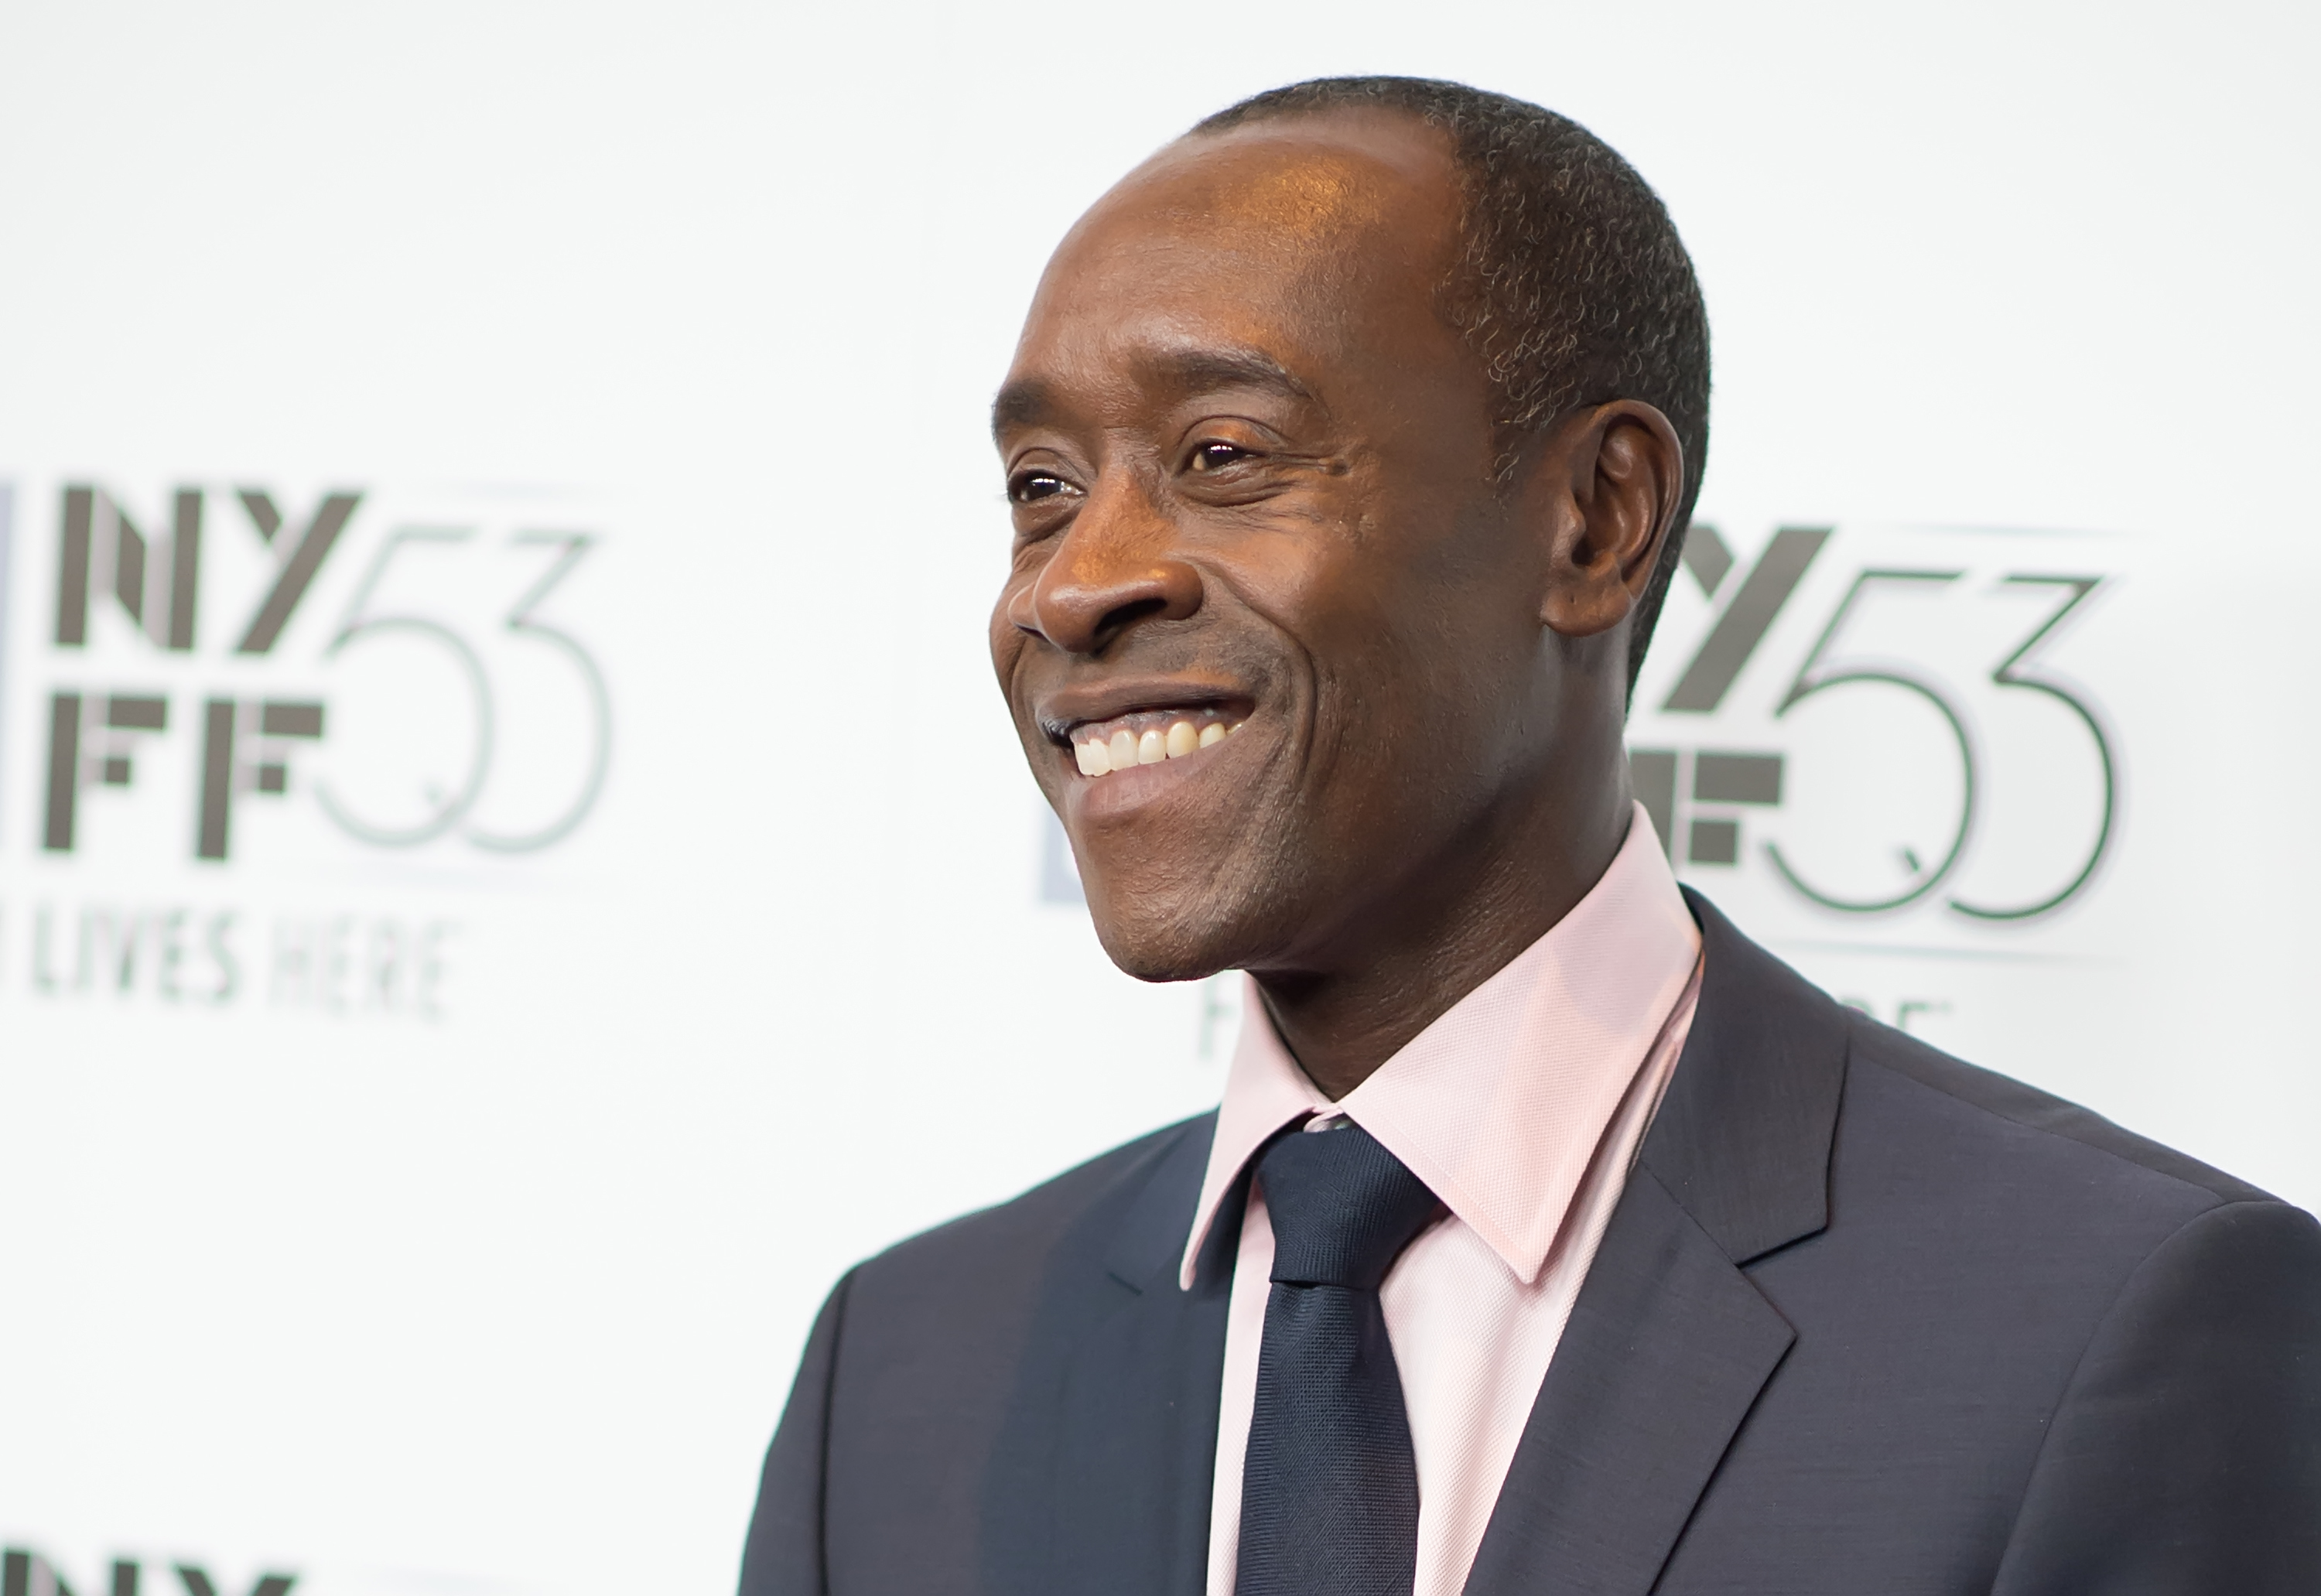 Actor Don Cheadle attends 53rd New York Film Festival - Closing Night Gala in New York City on Oct. 10, 2015.